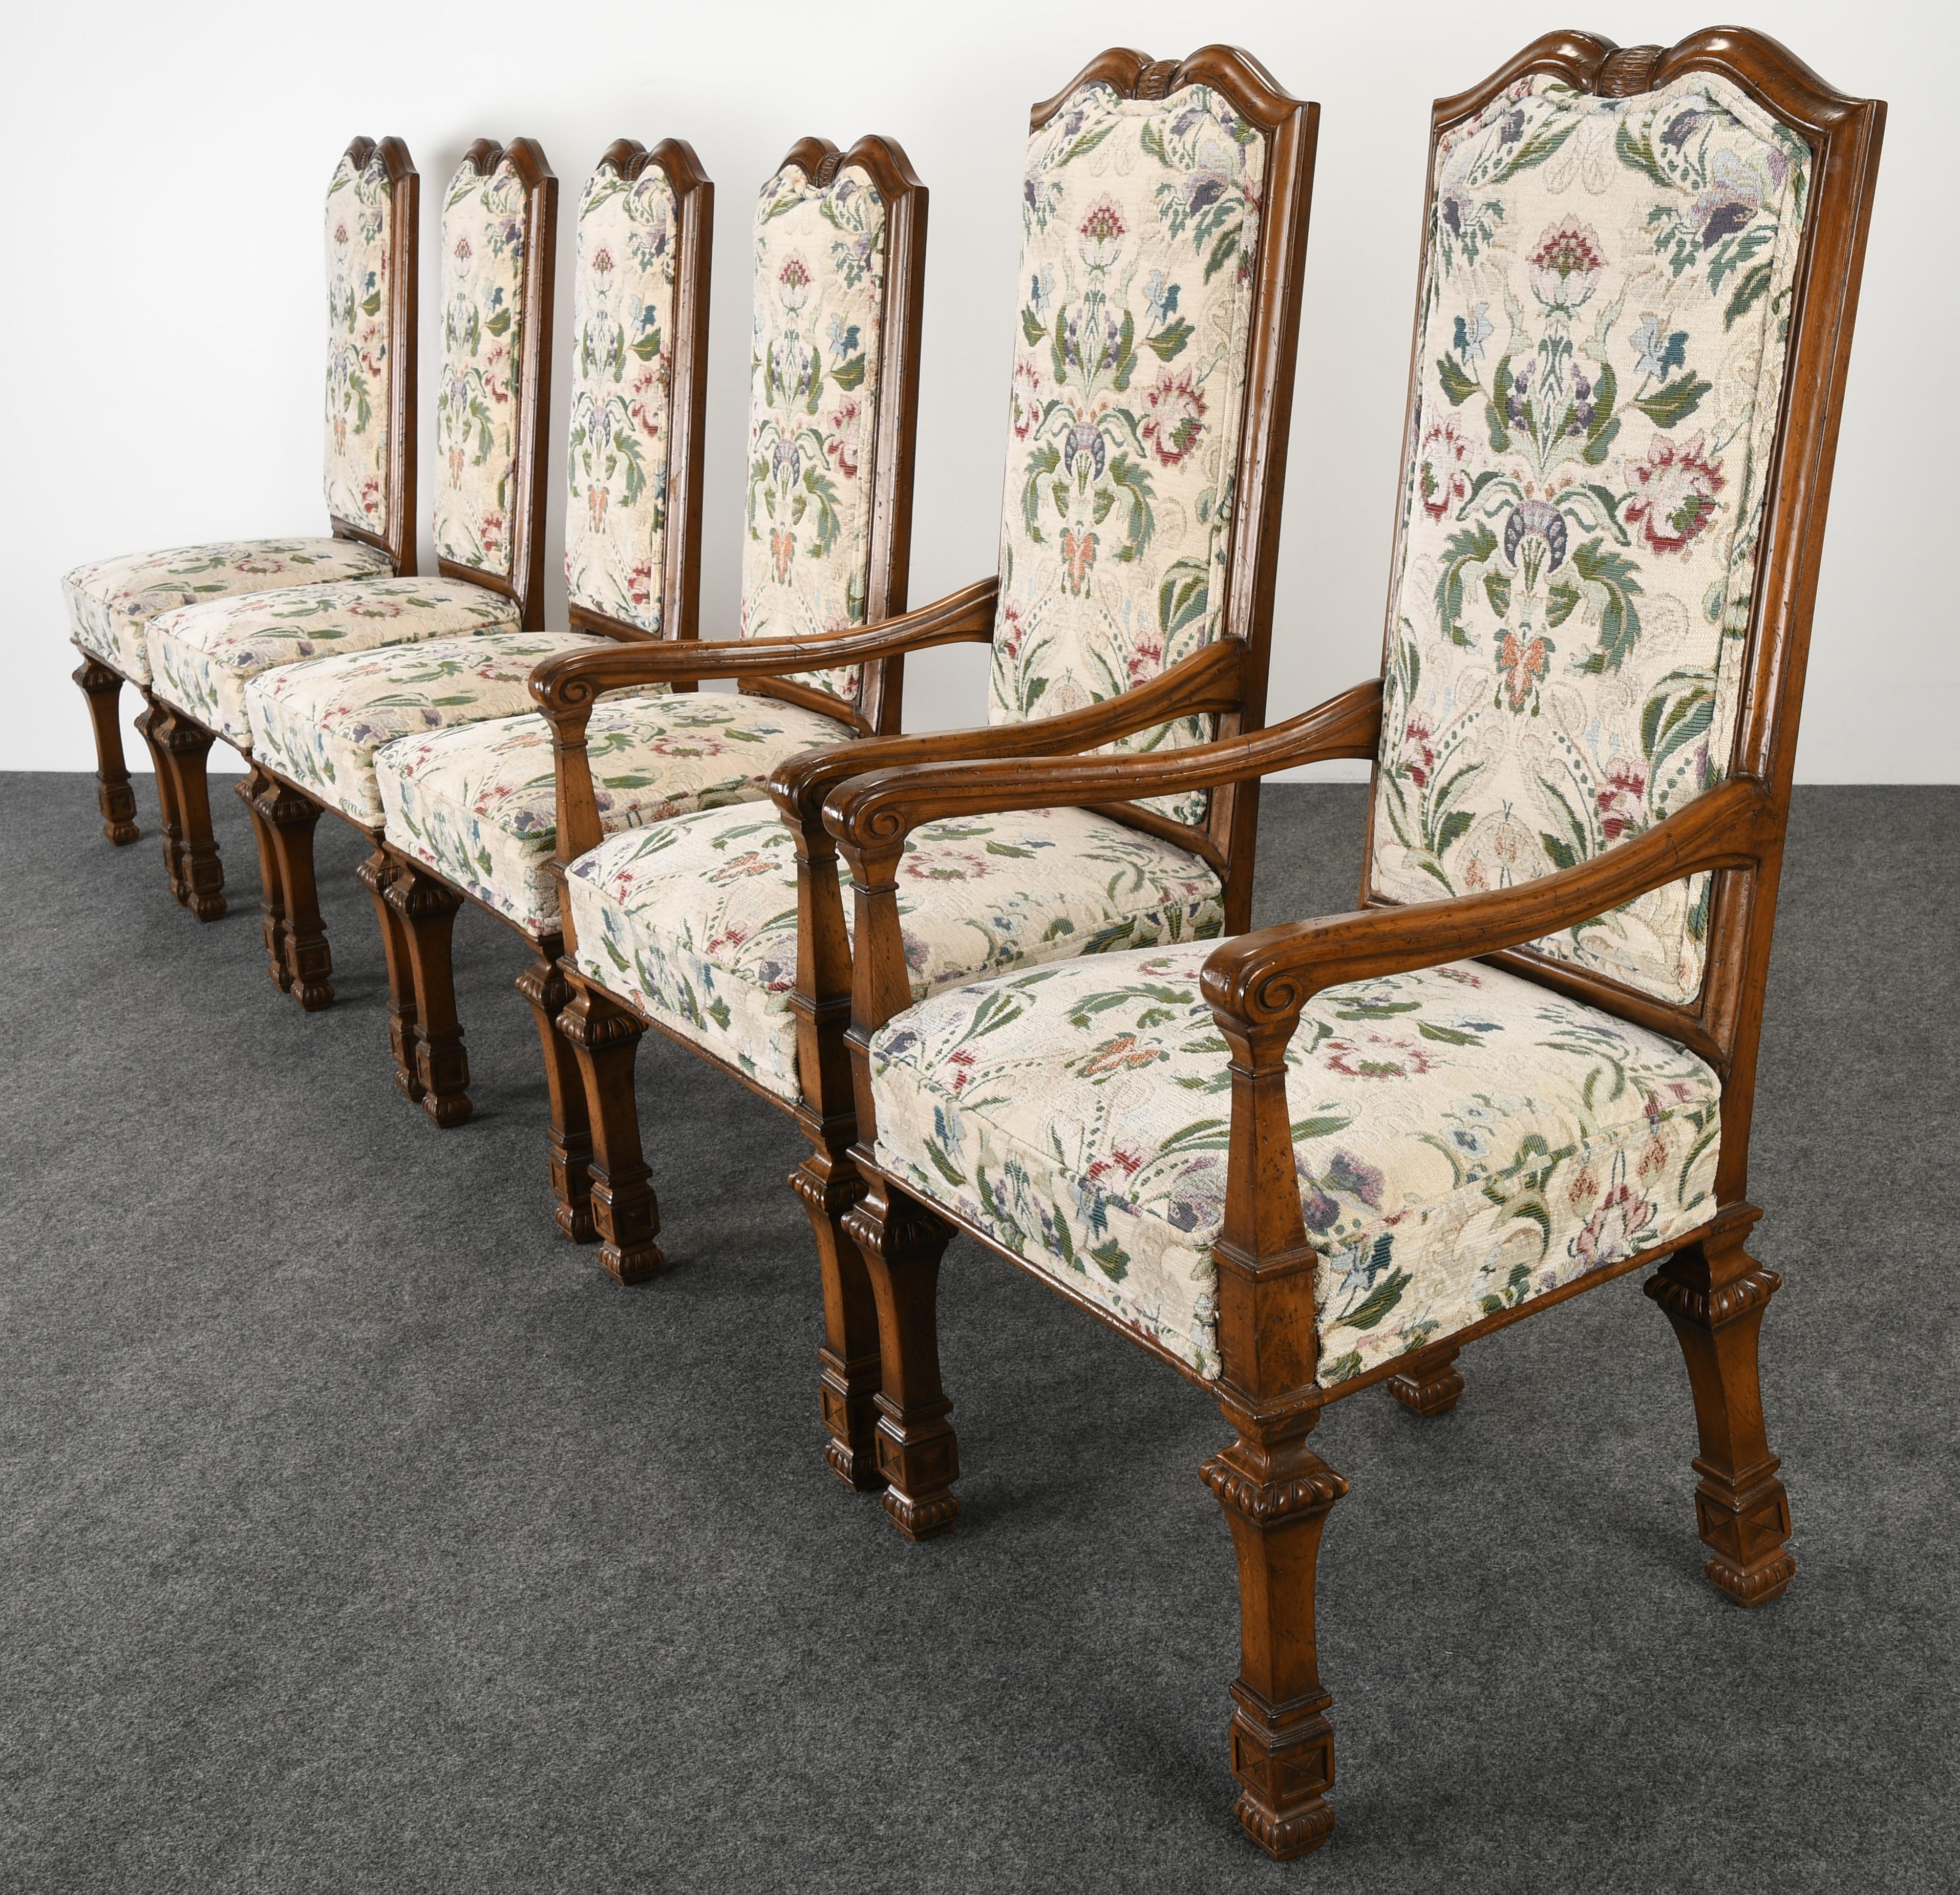 A decorative set of six Louis XIV style dining chairs by Auffray & Co Furniture. The Louis XIV chairs have a square baluster leg and an arched back with shaped indents. These finely carved French chairs are sturdy and in good condition with